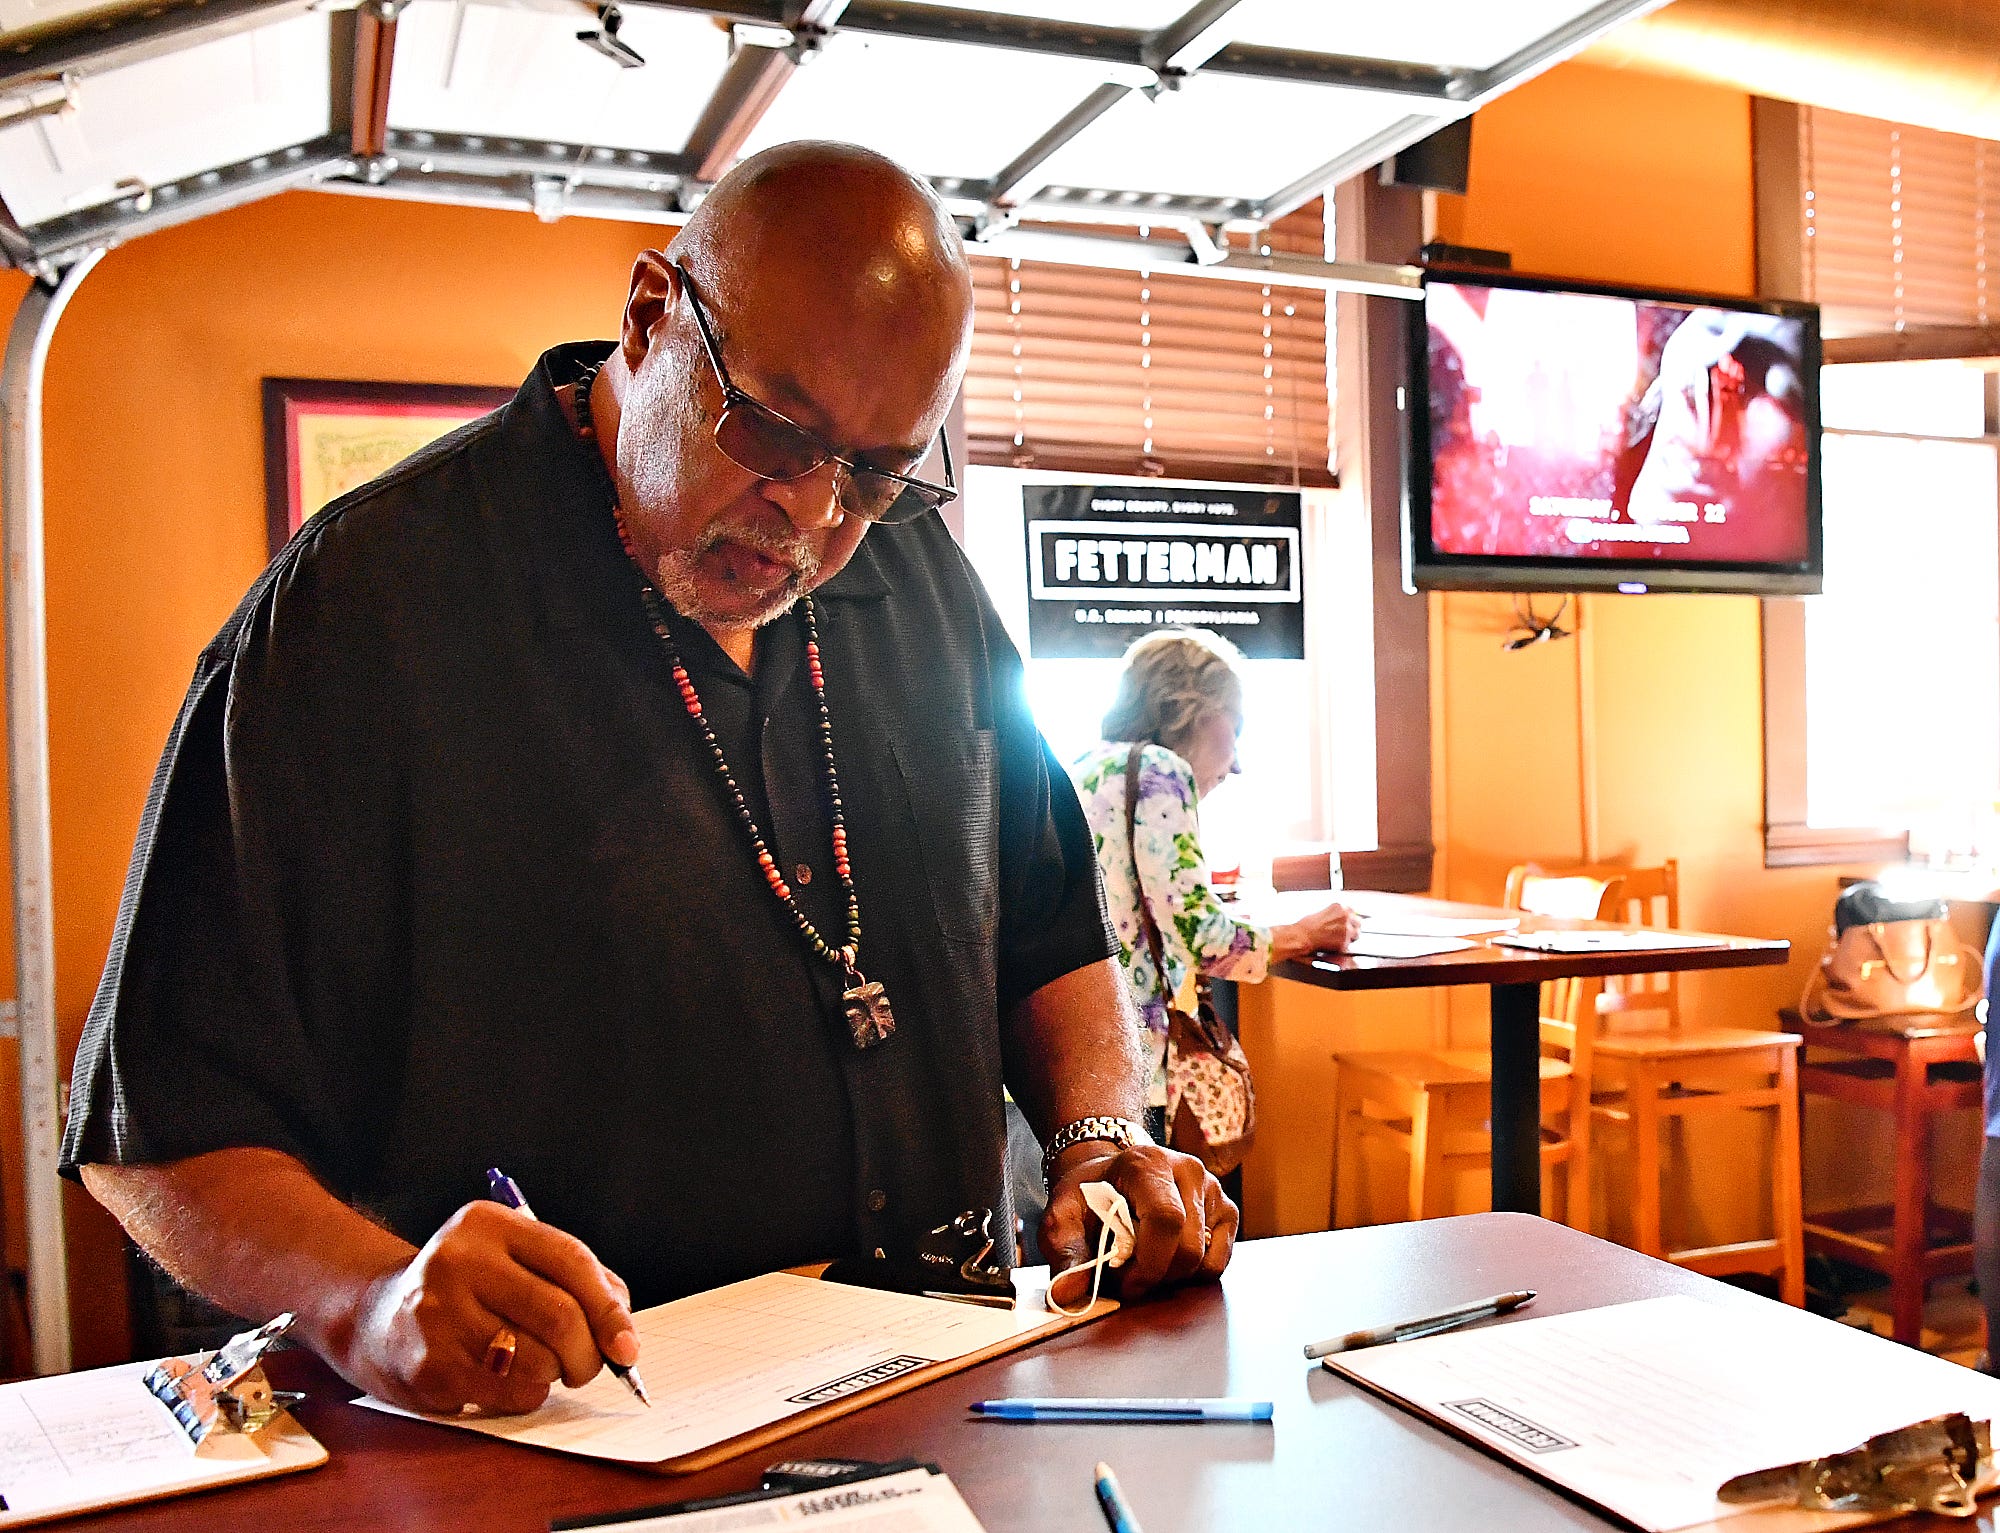 Jeff Kirkland, of York City, signs in before Lt. Gov. John Fetterman makes a campaign stop for U.S. Senate at Holy Hound Taproom in York City, Thursday, May 12, 2022. Kirkland is chair of the Lebanon Cemetery board of directors and serves as research director of the York African-American Historical Preservation Society. Dawn J. Sagert photo